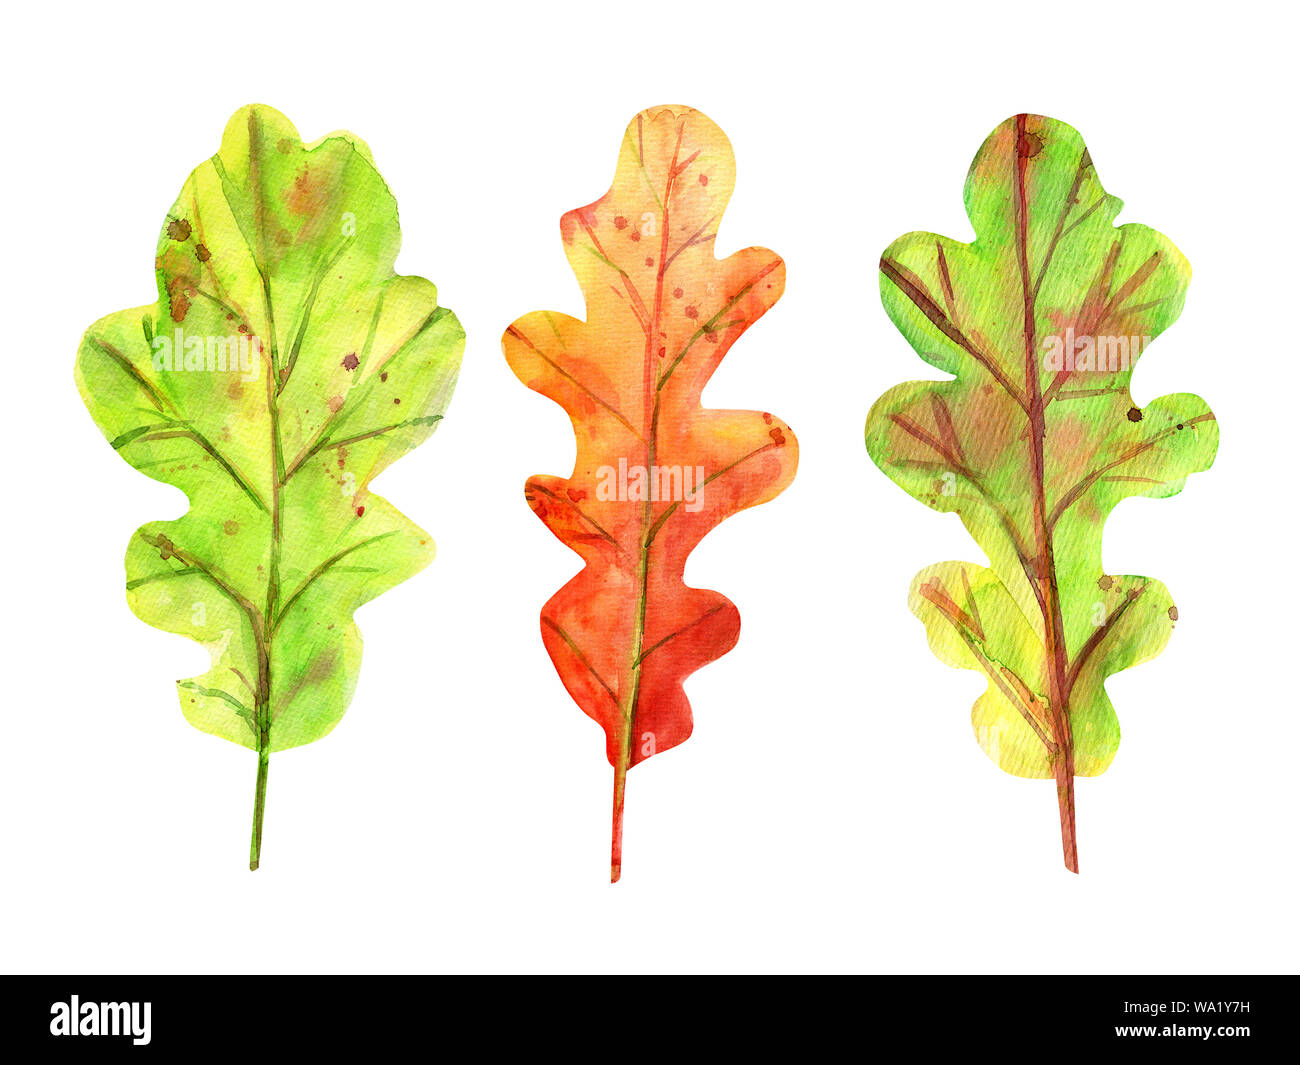 Watercolor autumn set with oak leaves. 3 fallen leaves of green and orange color with drops and splashes. Isolated objects on white background. Elemen Stock Photo